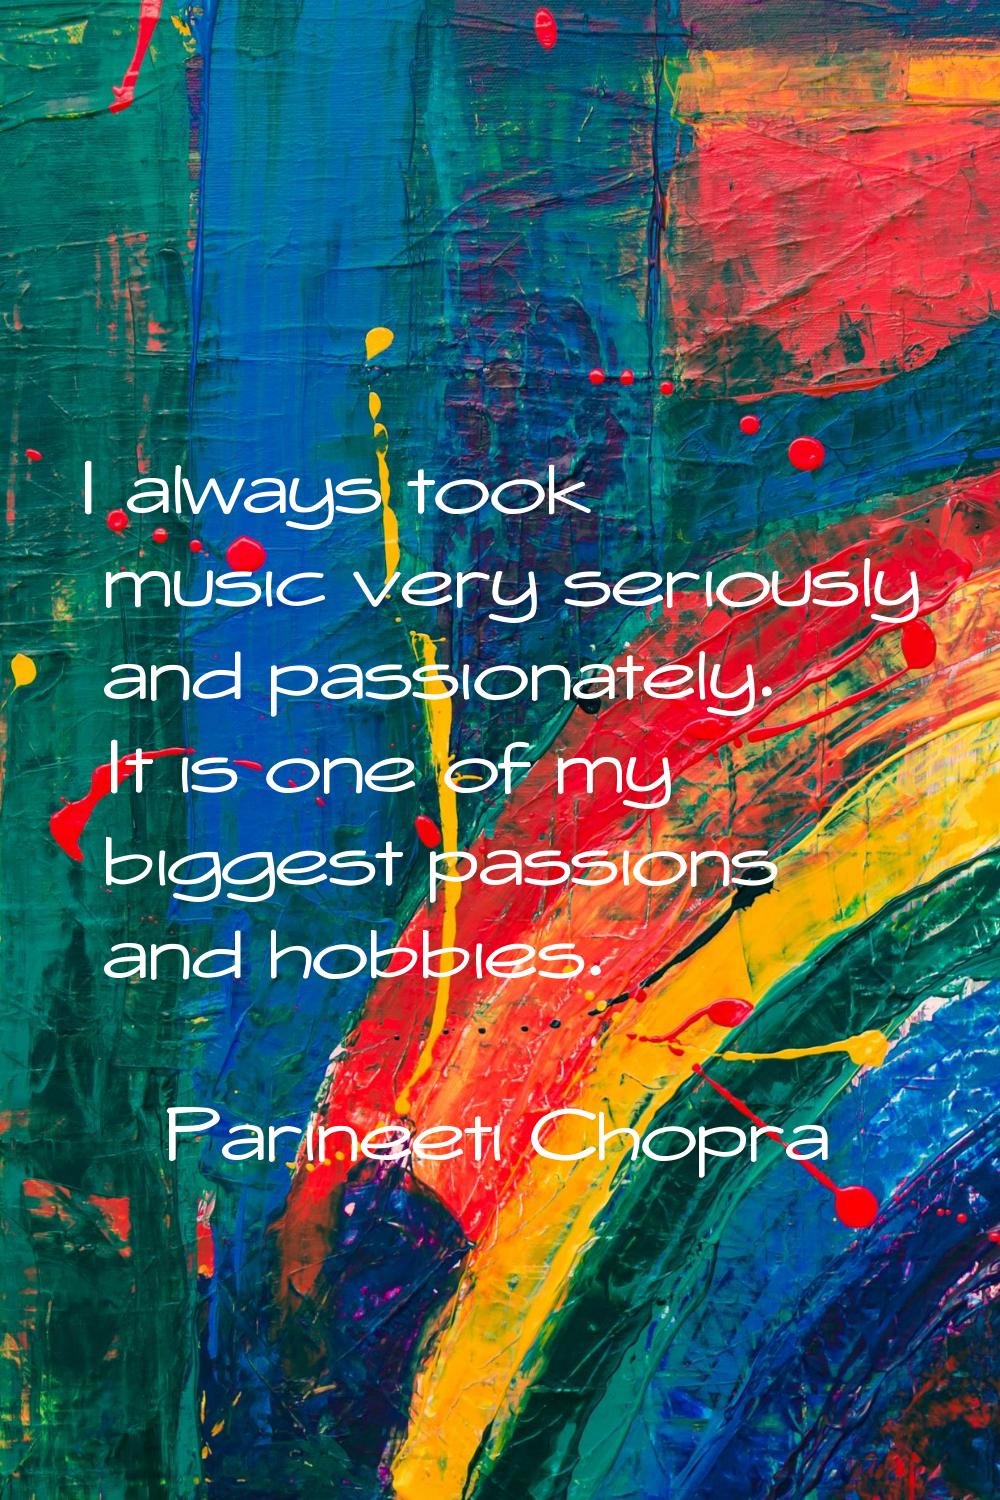 I always took music very seriously and passionately. It is one of my biggest passions and hobbies.